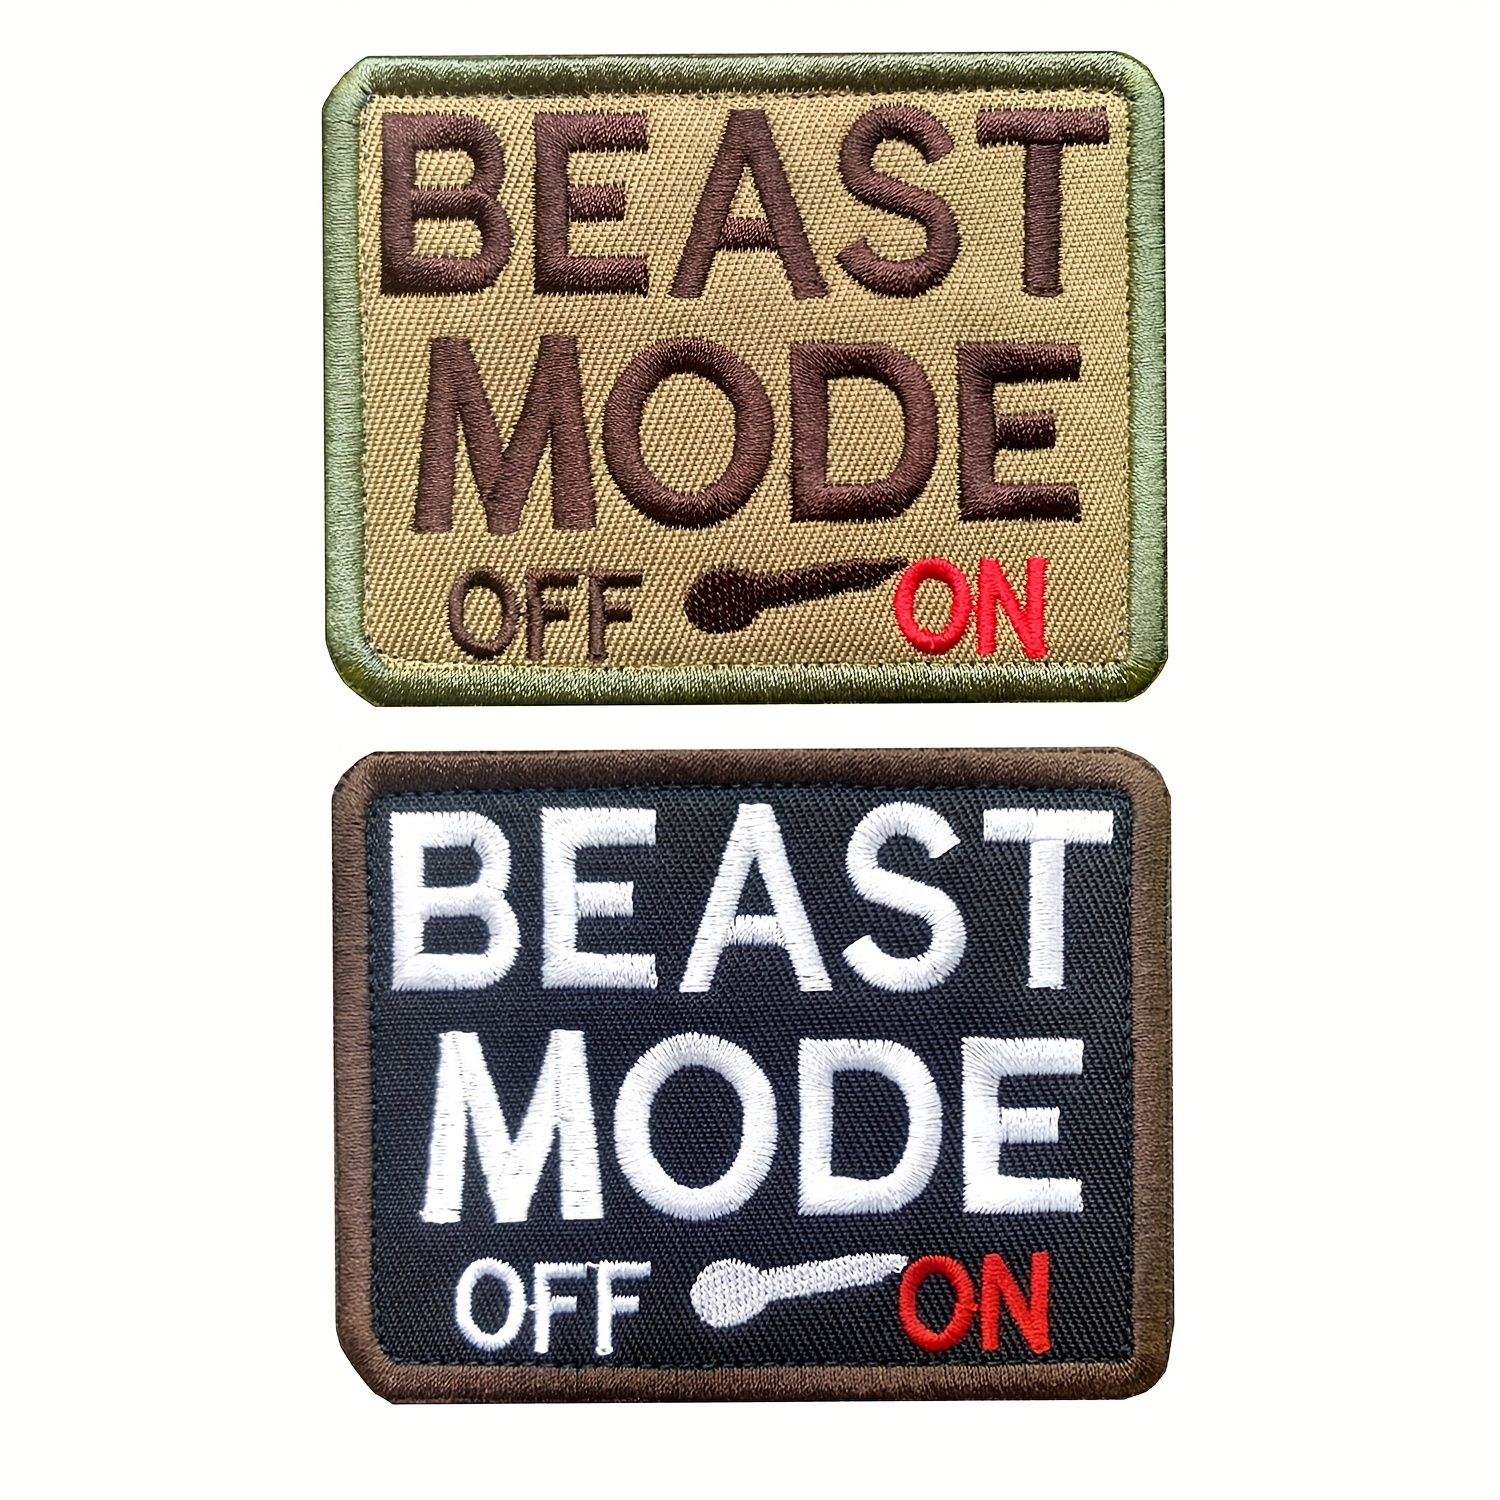 Show Your * Mode On with Military Badge Emblem Patches - Hook & Loop  Patches for Backpacks, Caps & Bags!